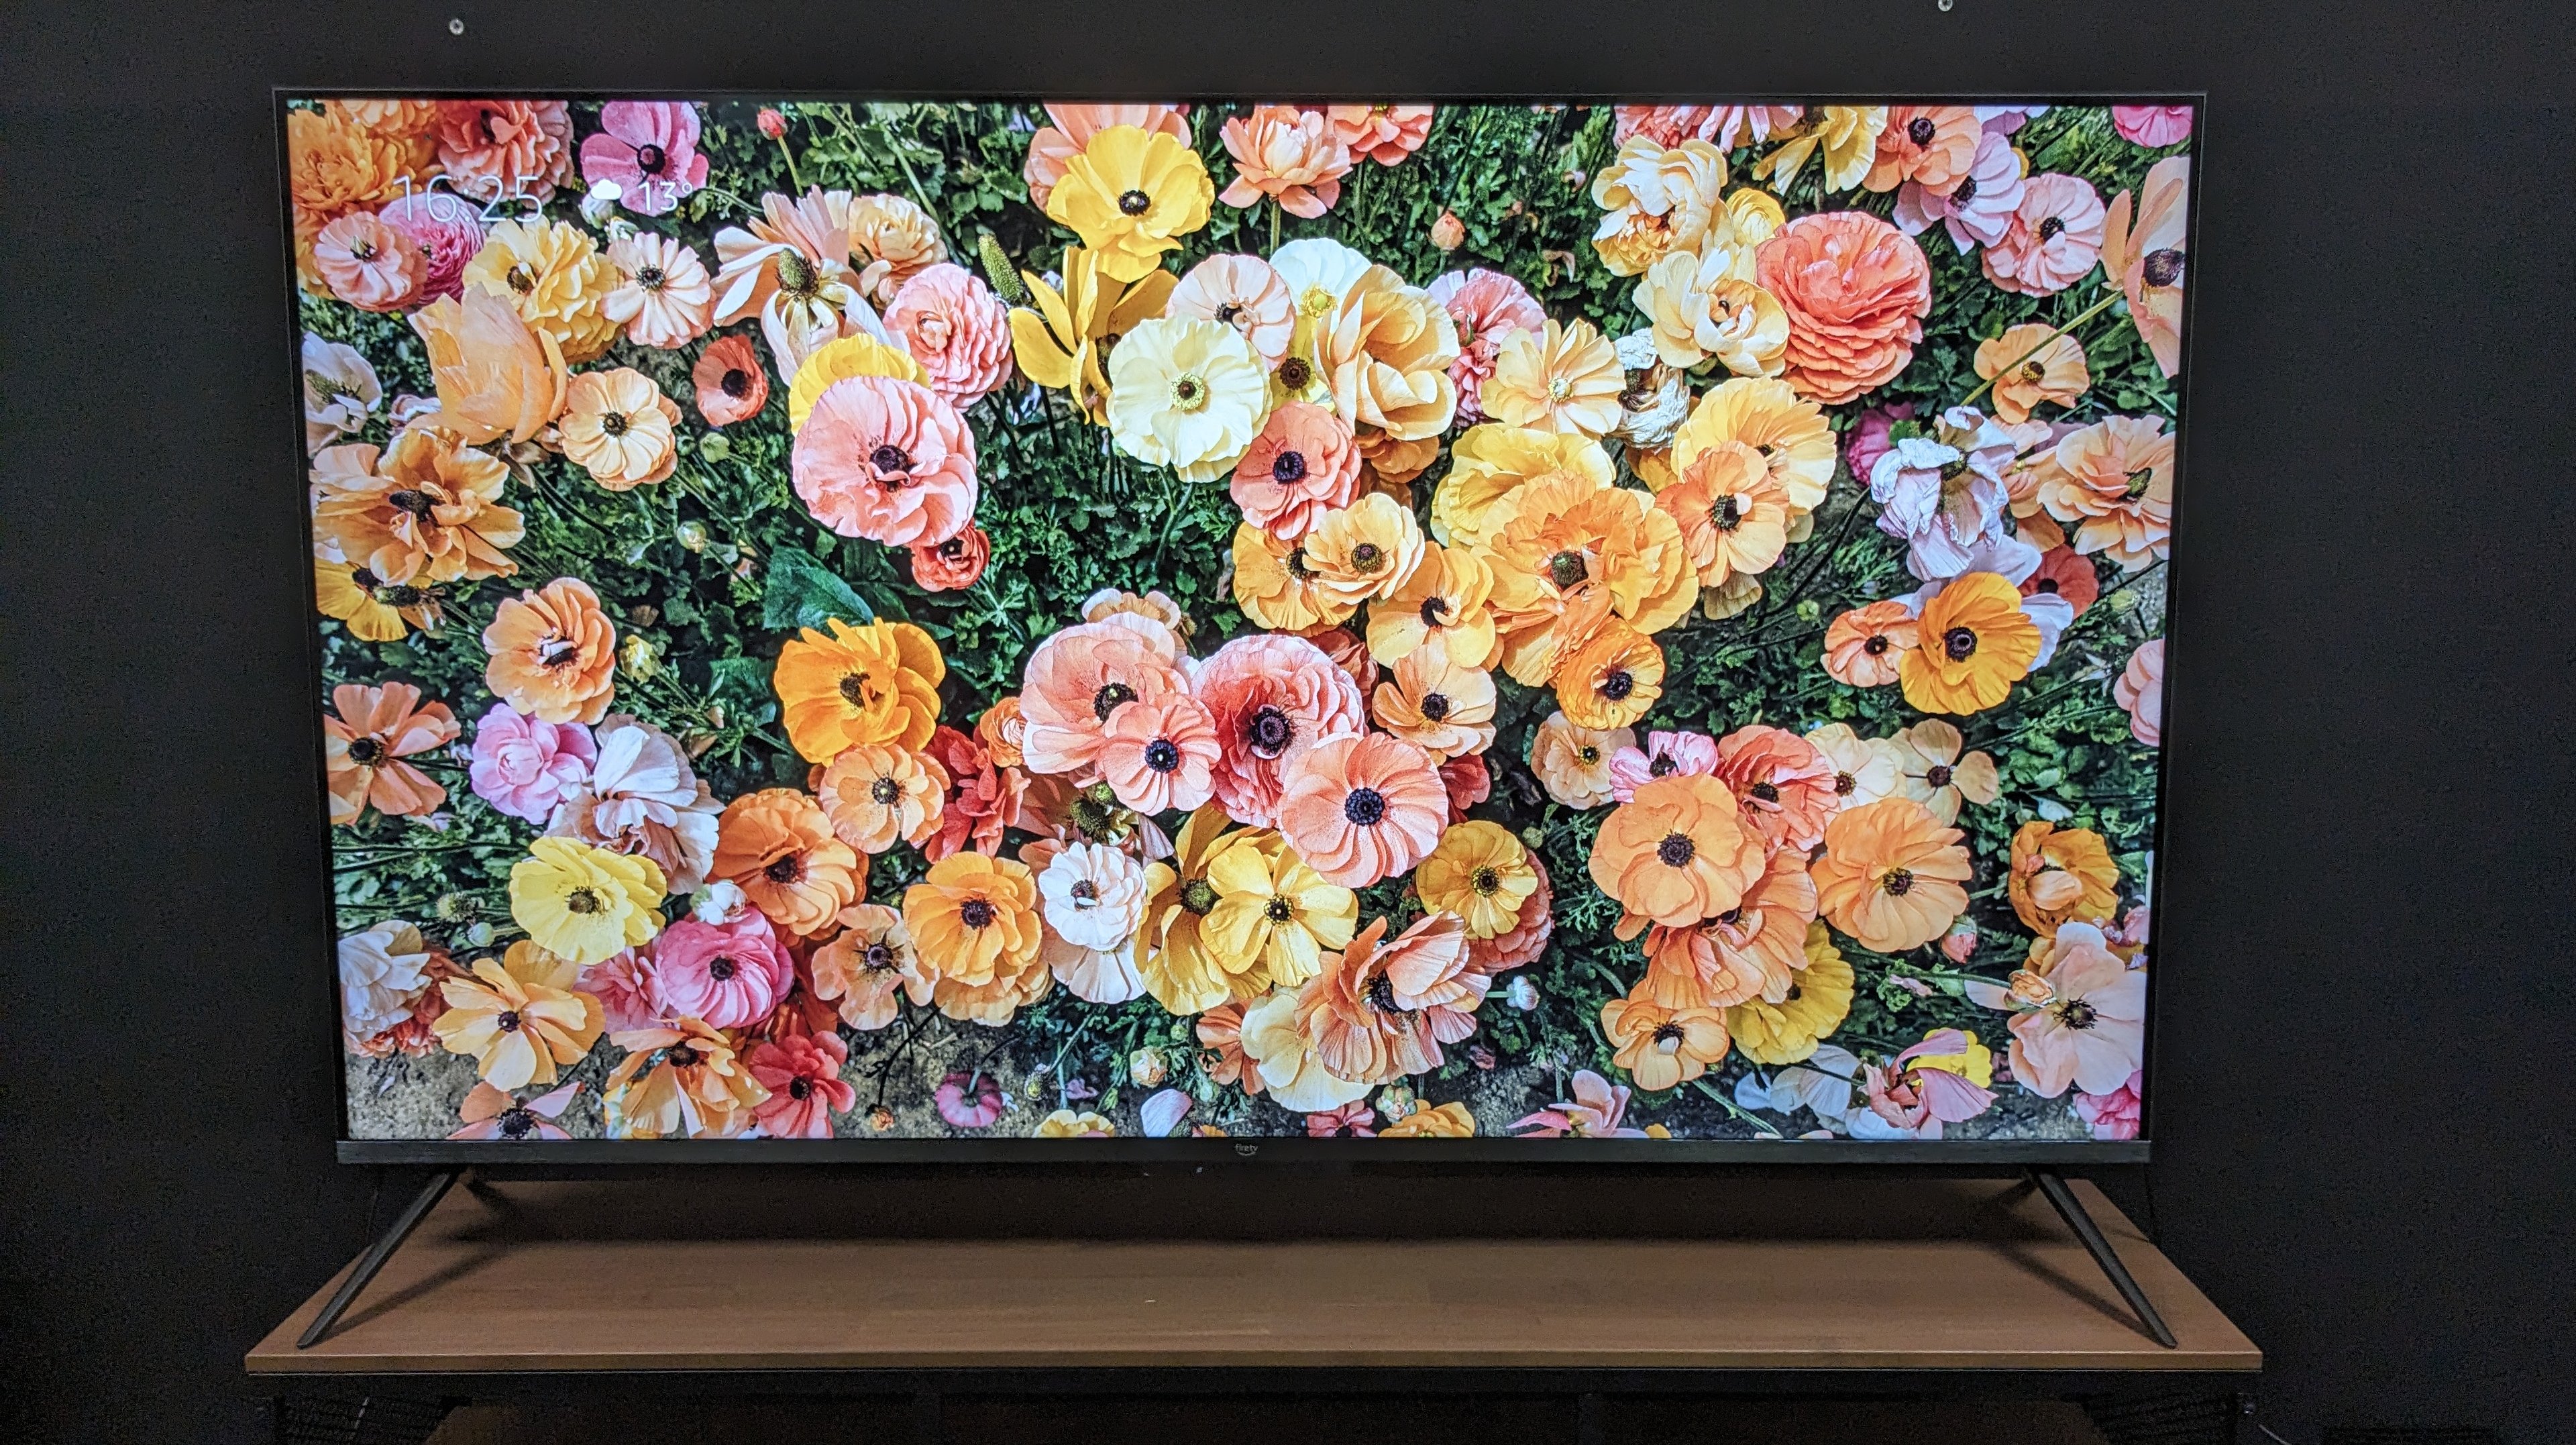 Amazon Omni QLED Ambient Experience on display showing flowers on screen